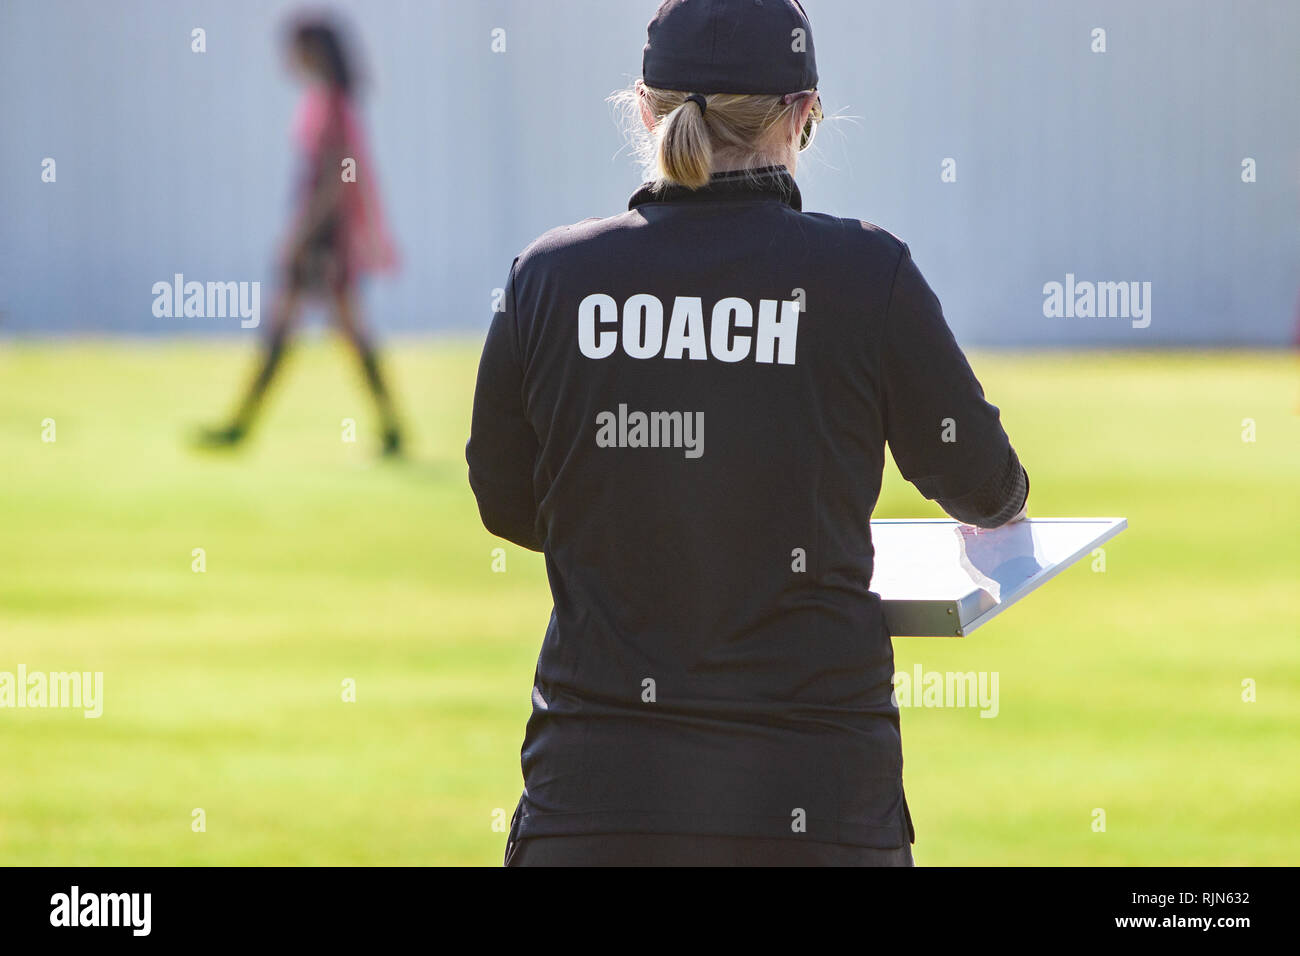 Back view of sport coach in COACH shirt at an outdoor sport field Stock Photo